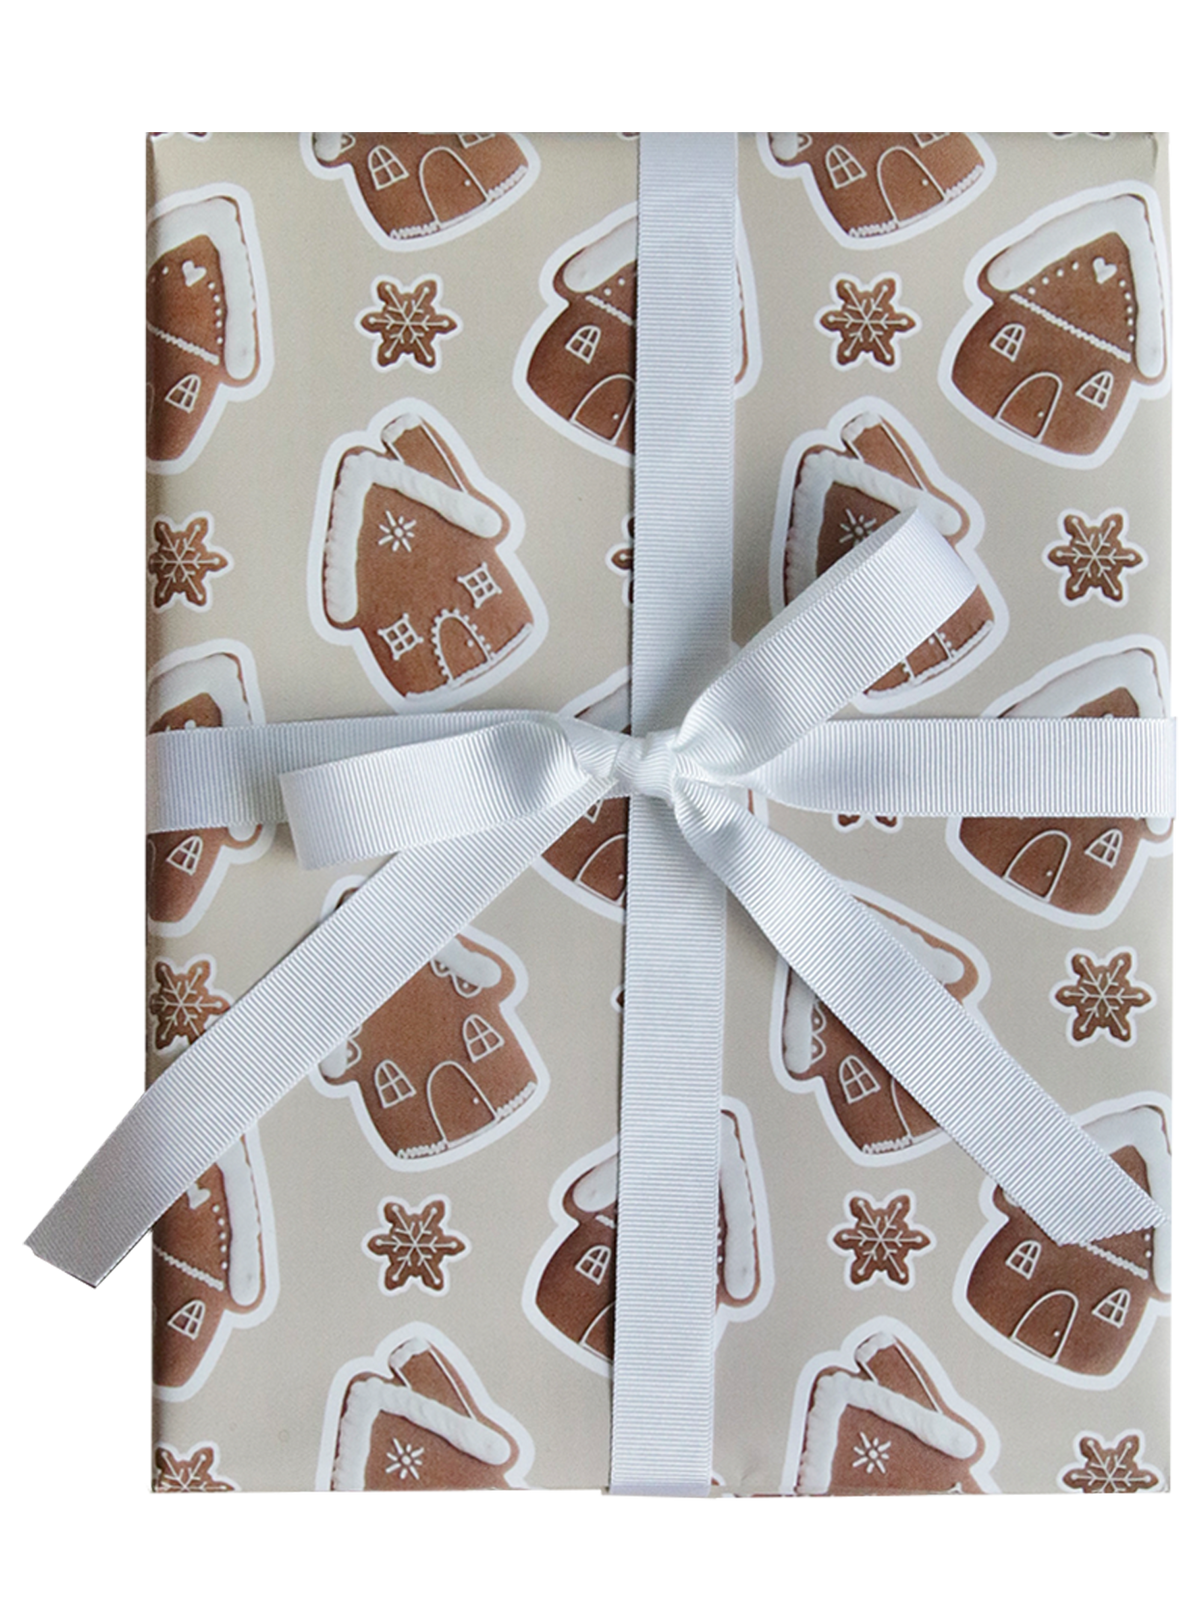 Afternoon Crumbs - Gingerbread House Wrapping Paper - £3 - afternooncrumbs.com